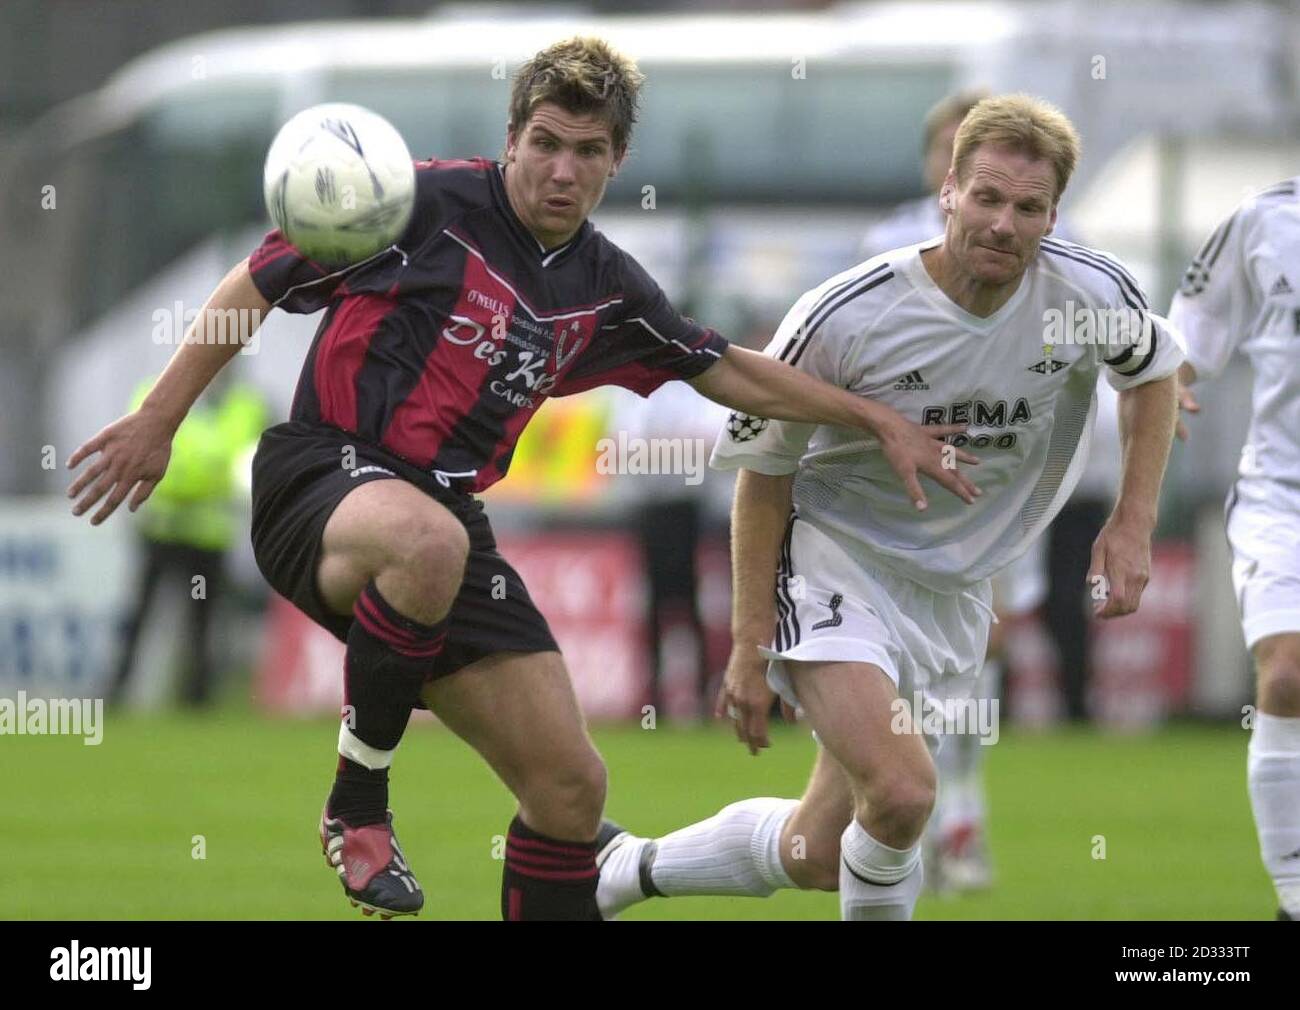 Dublin Bohemians player, Robbie Doyle (L) chases the ball with Rosenborg BK player, Fredrik Wisnes, in tonight's UEFA Champions League Qualifier at the Bohemians Dalymount Park, in Dublin, Republic of Ireland. Stock Photo